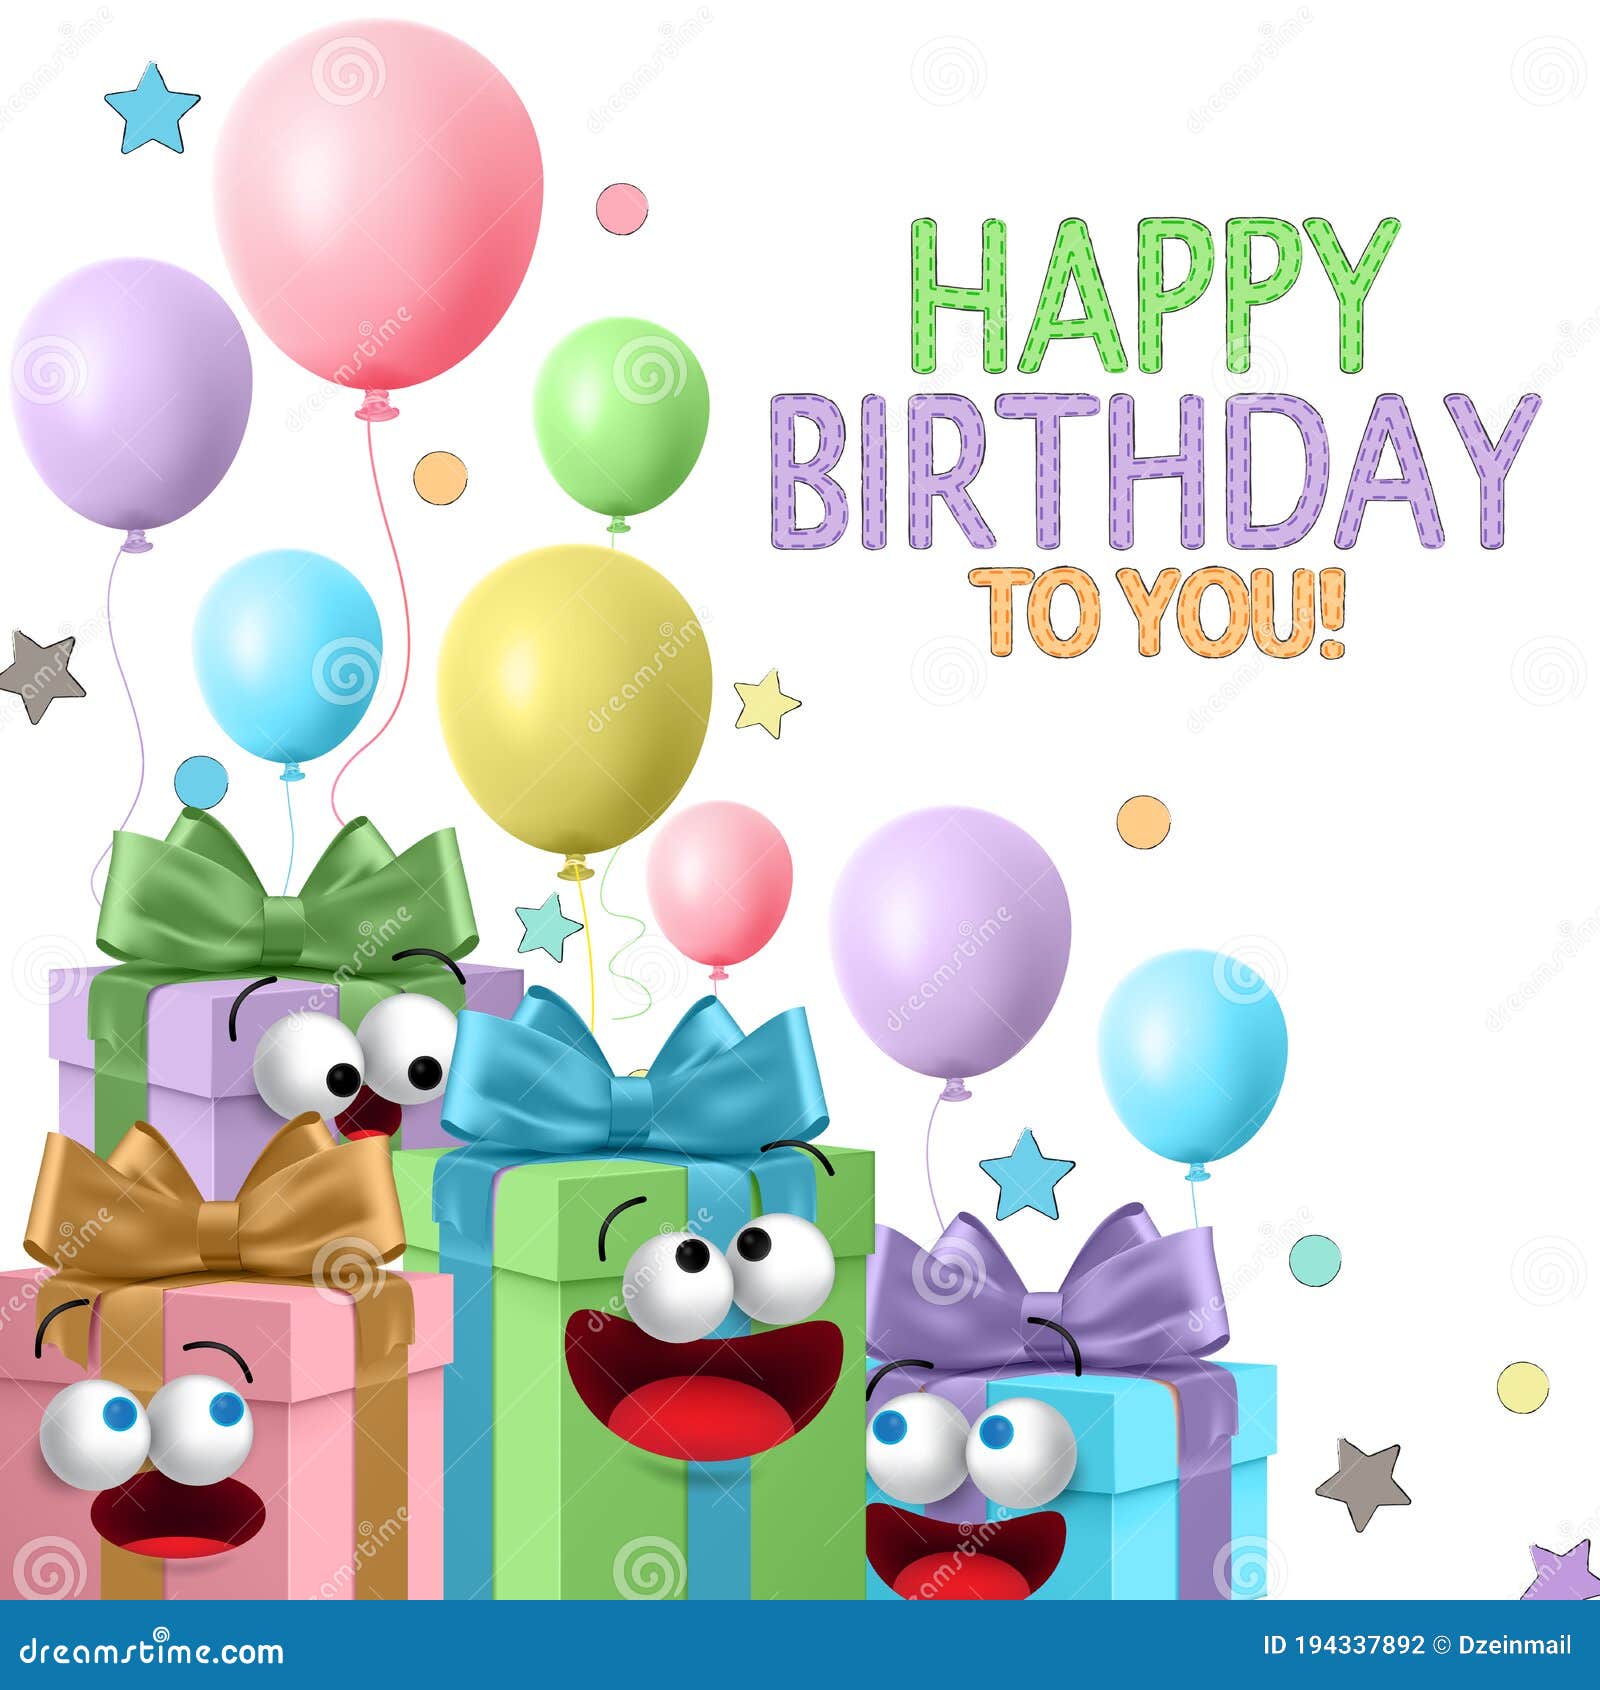 Happy Birthday Gift Cartoons Vector Template Design. Birthday Greeting Text  with Cute Gift Cartoon Stock Vector - Illustration of birthday, color:  194337892